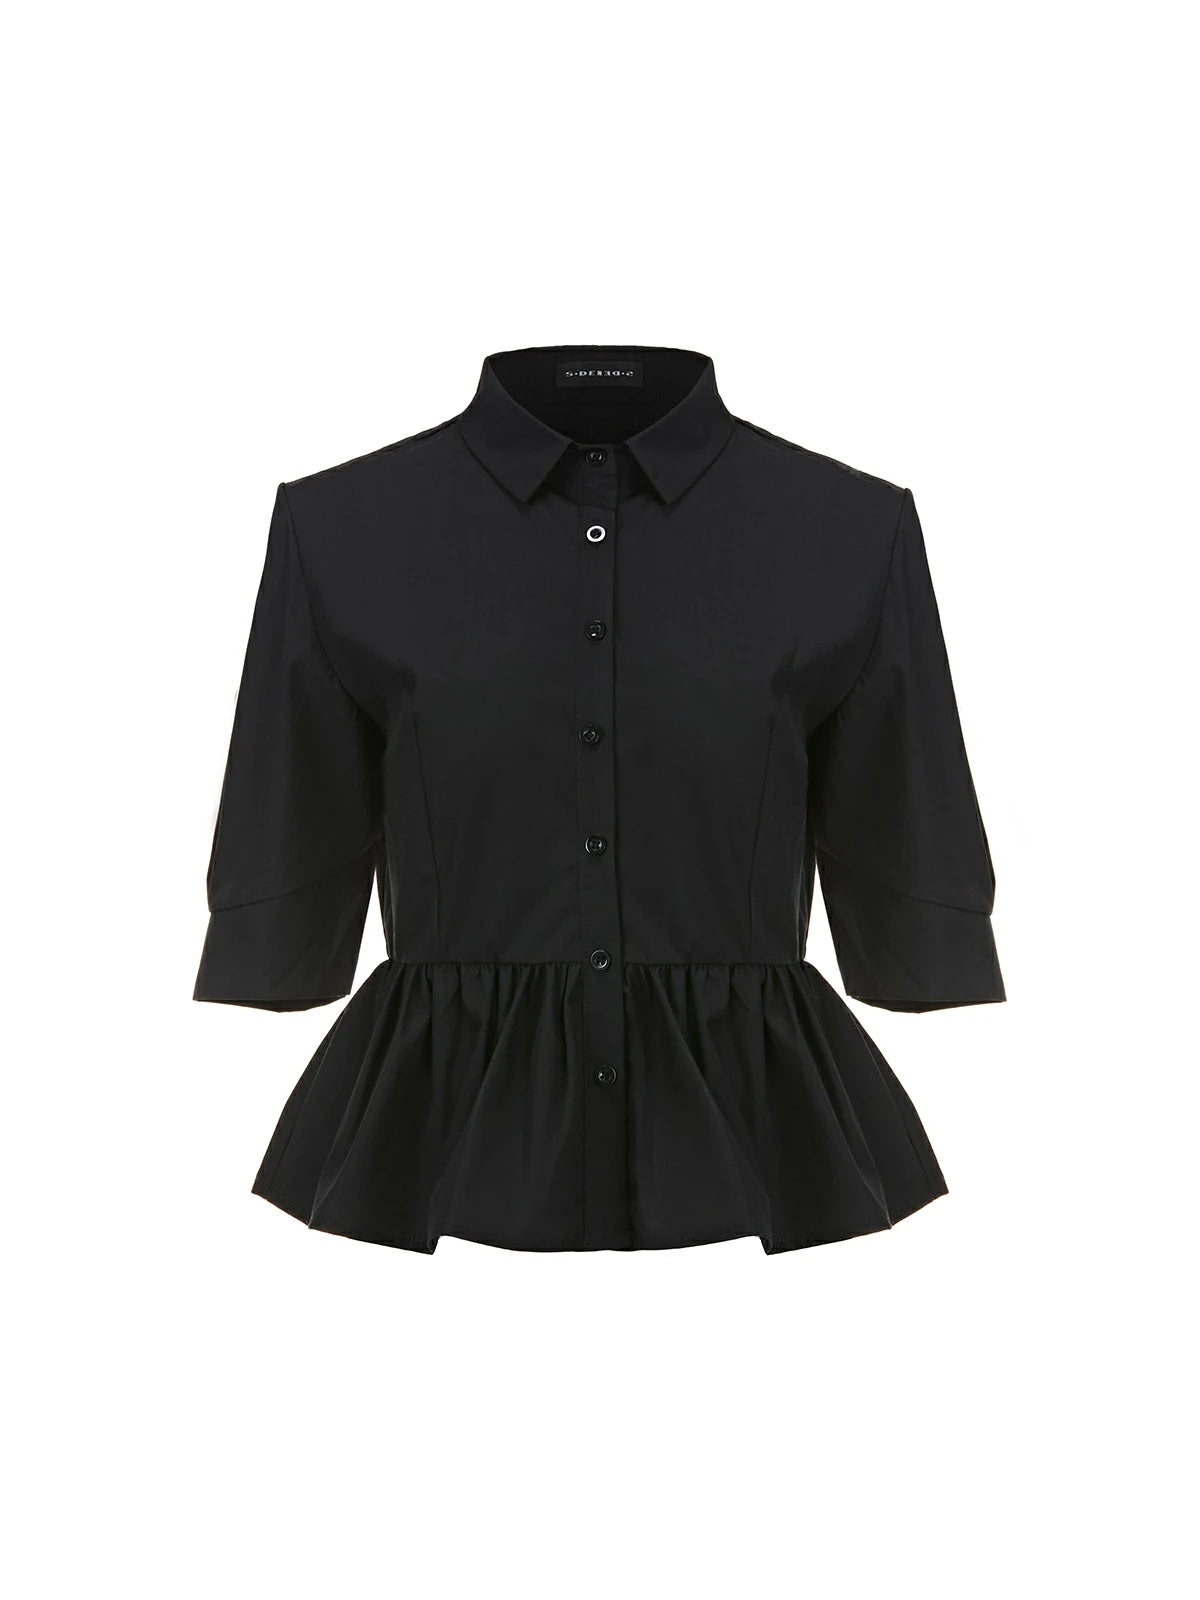 Collared Pleated Short Blouse